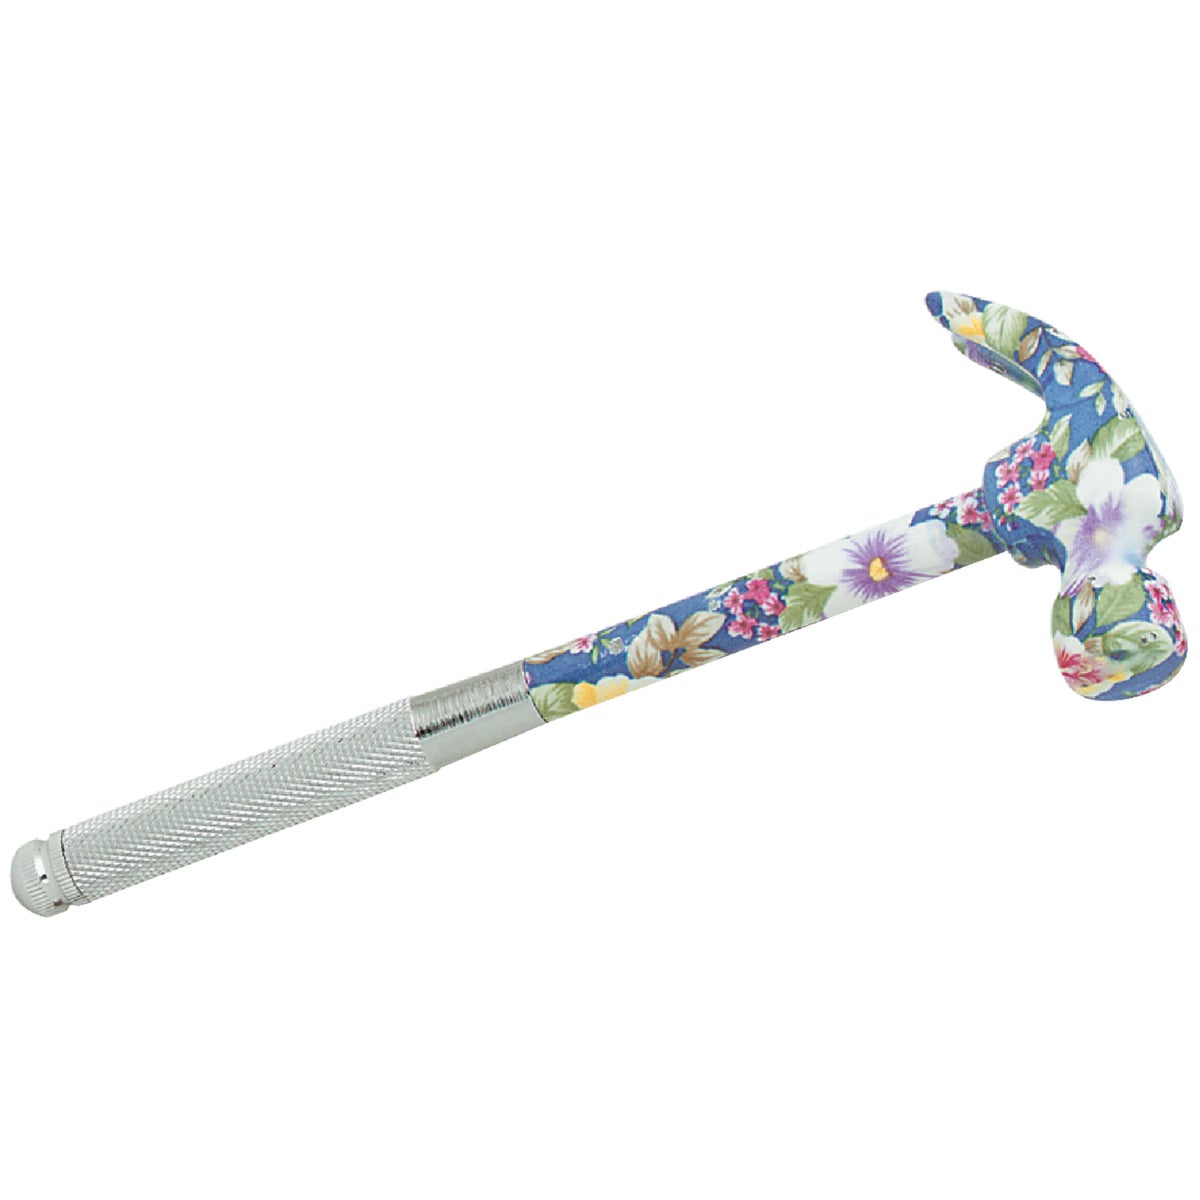 Item 320587, Flowered pattern head and shaft with chrome knurled handle.